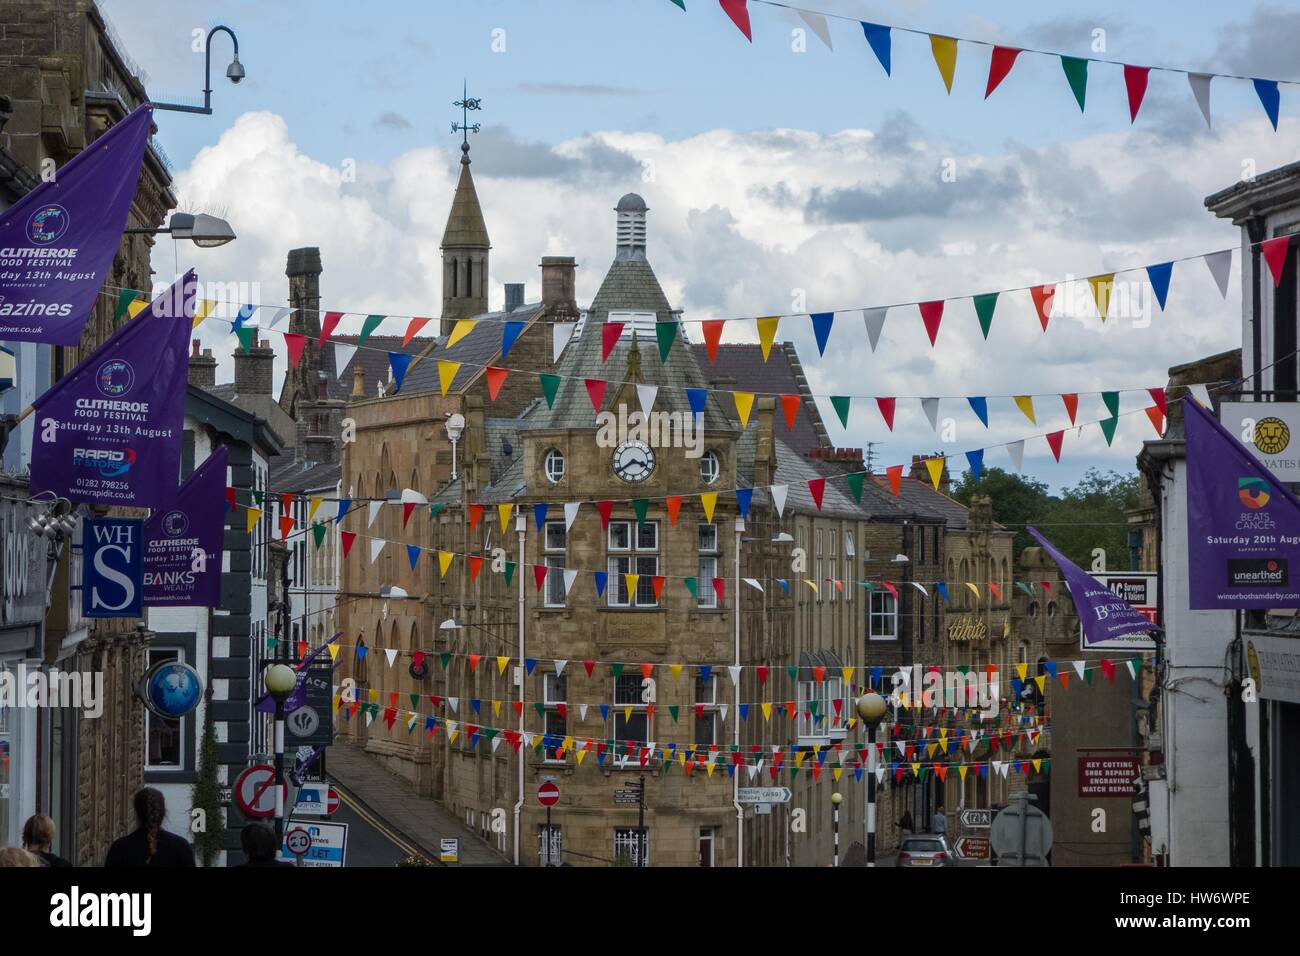 Clitheroe Town center with bunting hanging from buildings Stock Photo